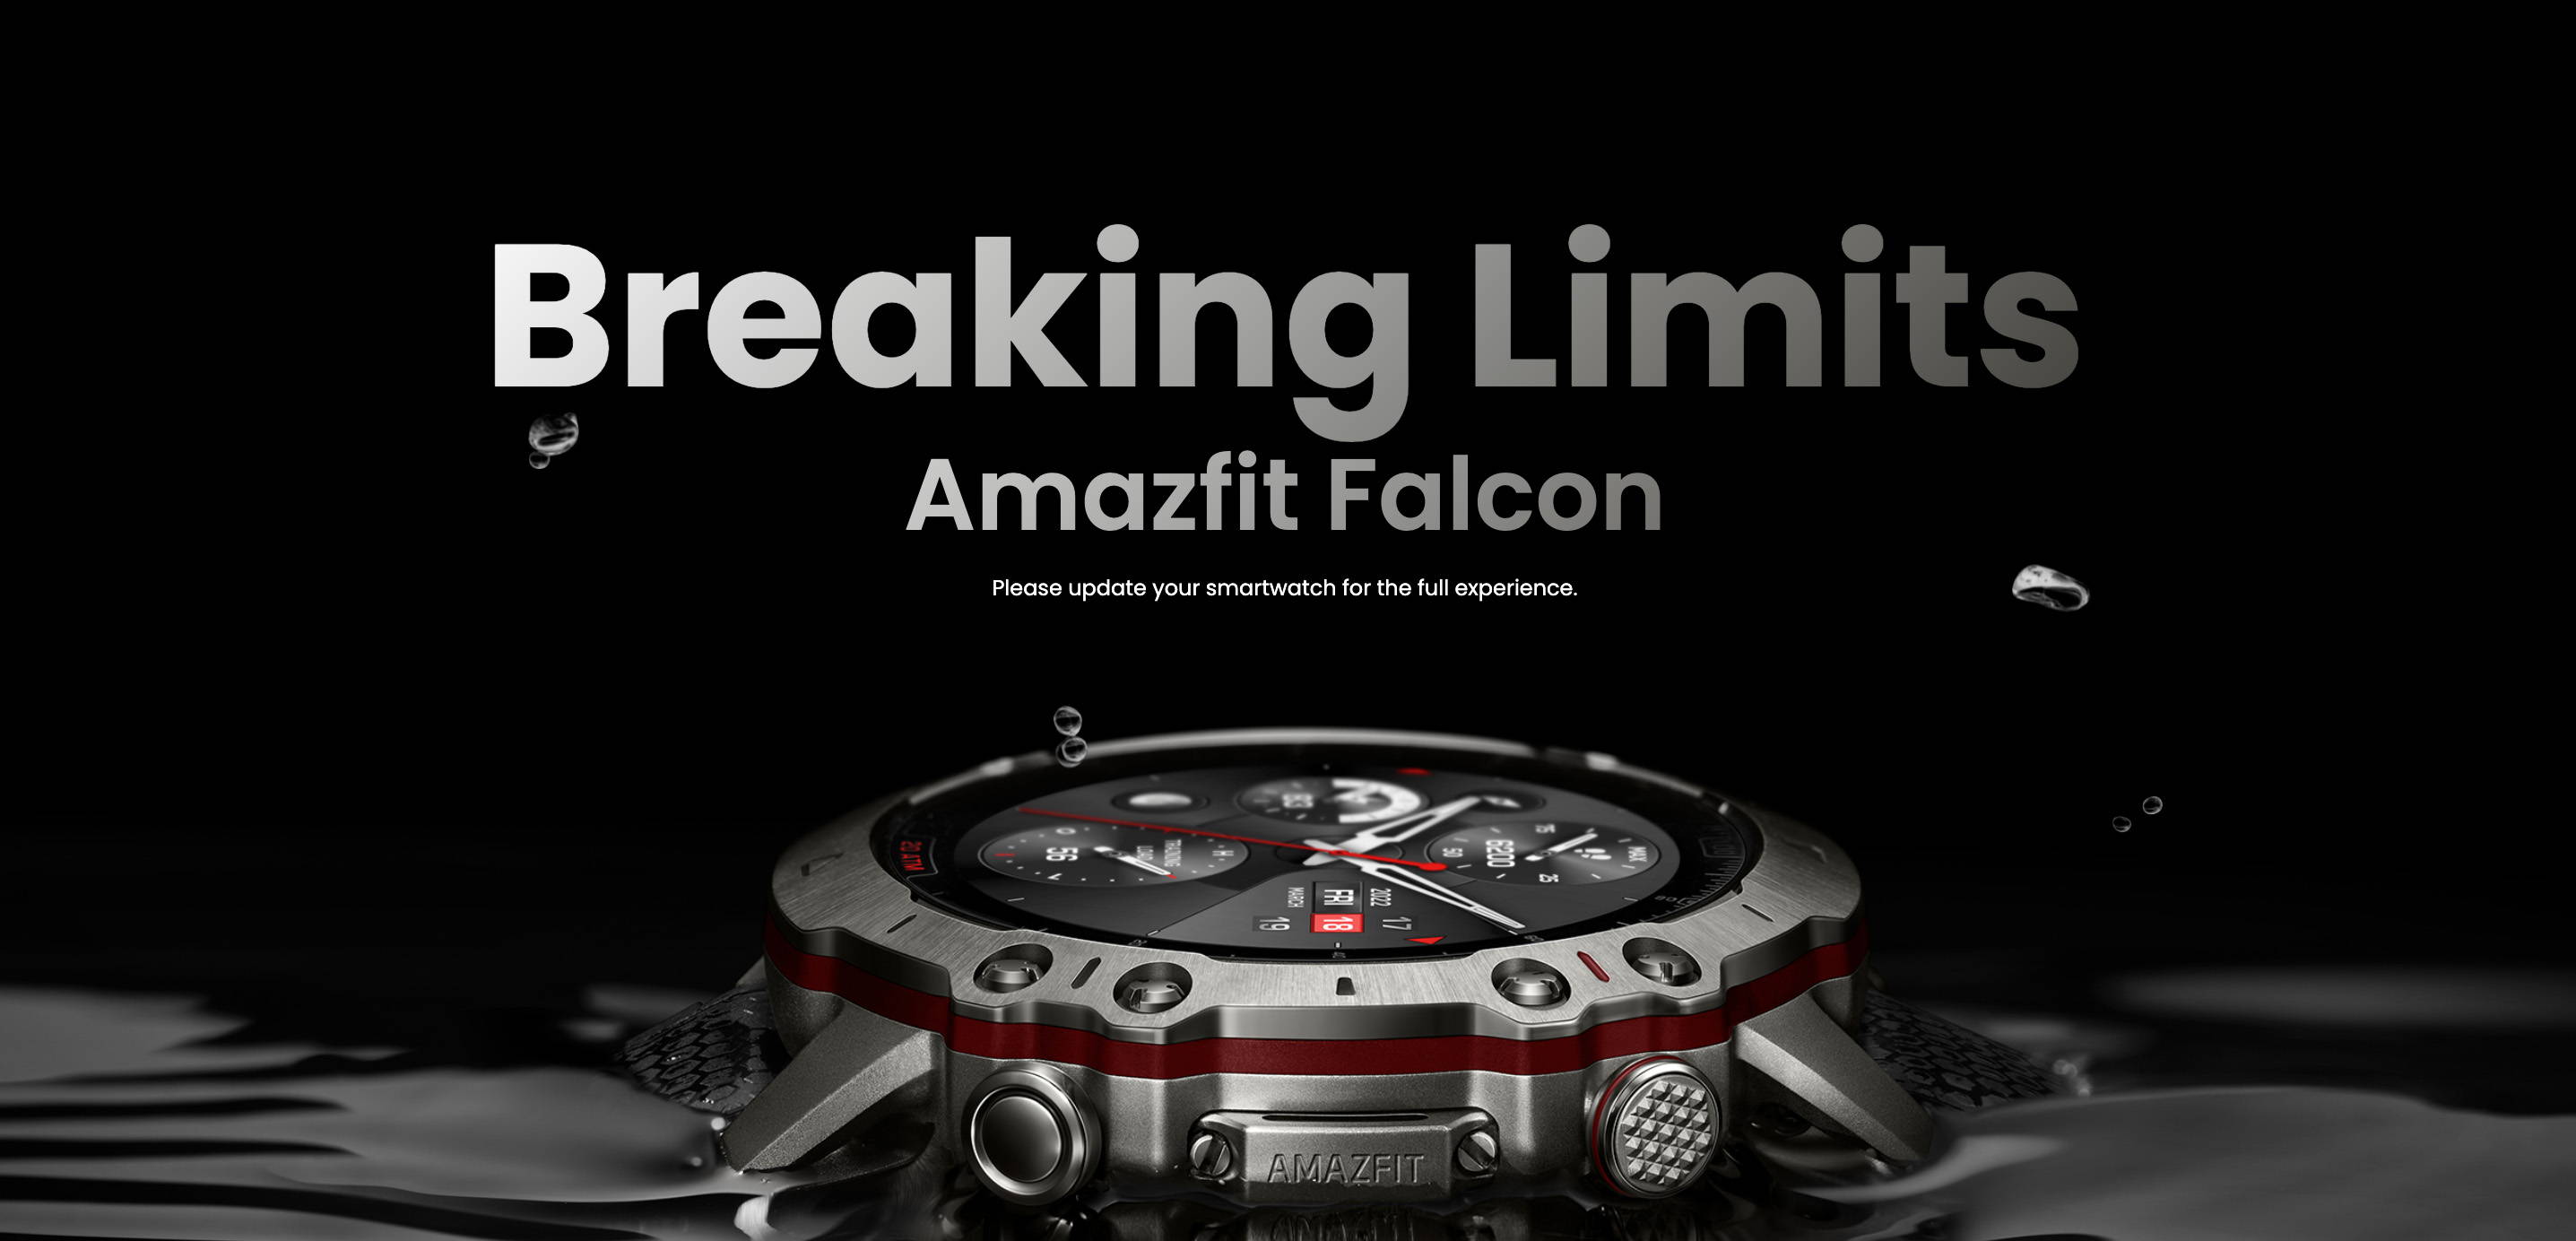  Amazfit Falcon Premium Military Smart Watch, Offline Map  Support, Titanium Body, 14 Days Battery Life, Dual-Band & 6 Satellite  Positioning, Strength Training, 200m Water-Resistance : Electronics